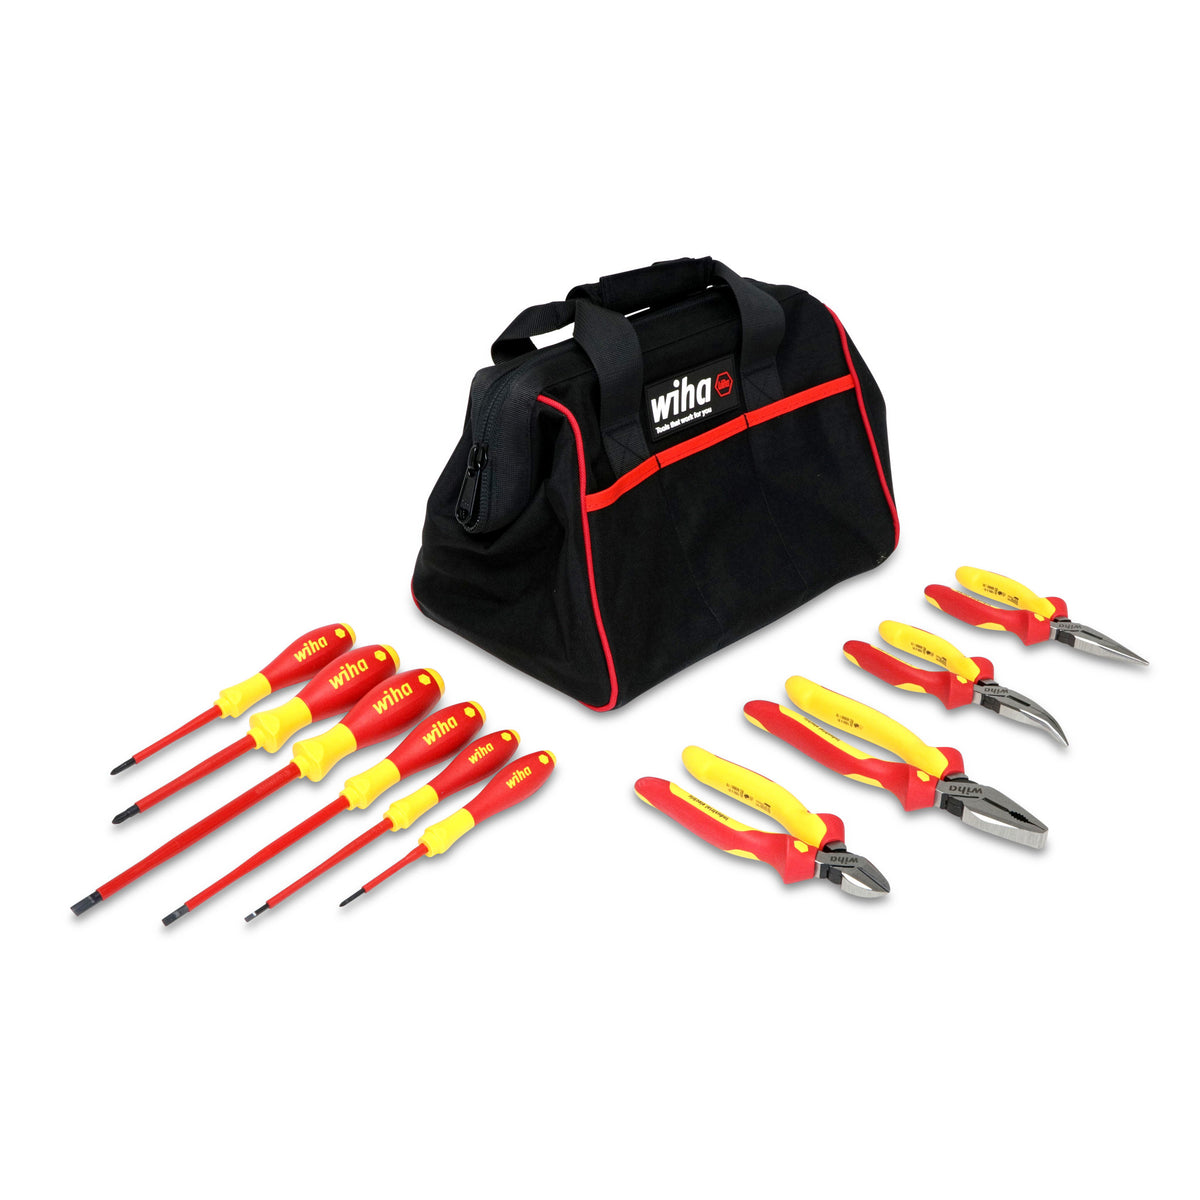  Wiha 9300702 Competence Electrician Tool Set VDE-Insulated  Screwdriver Kit, Black, X-Large, 80-Piece : Tools & Home Improvement